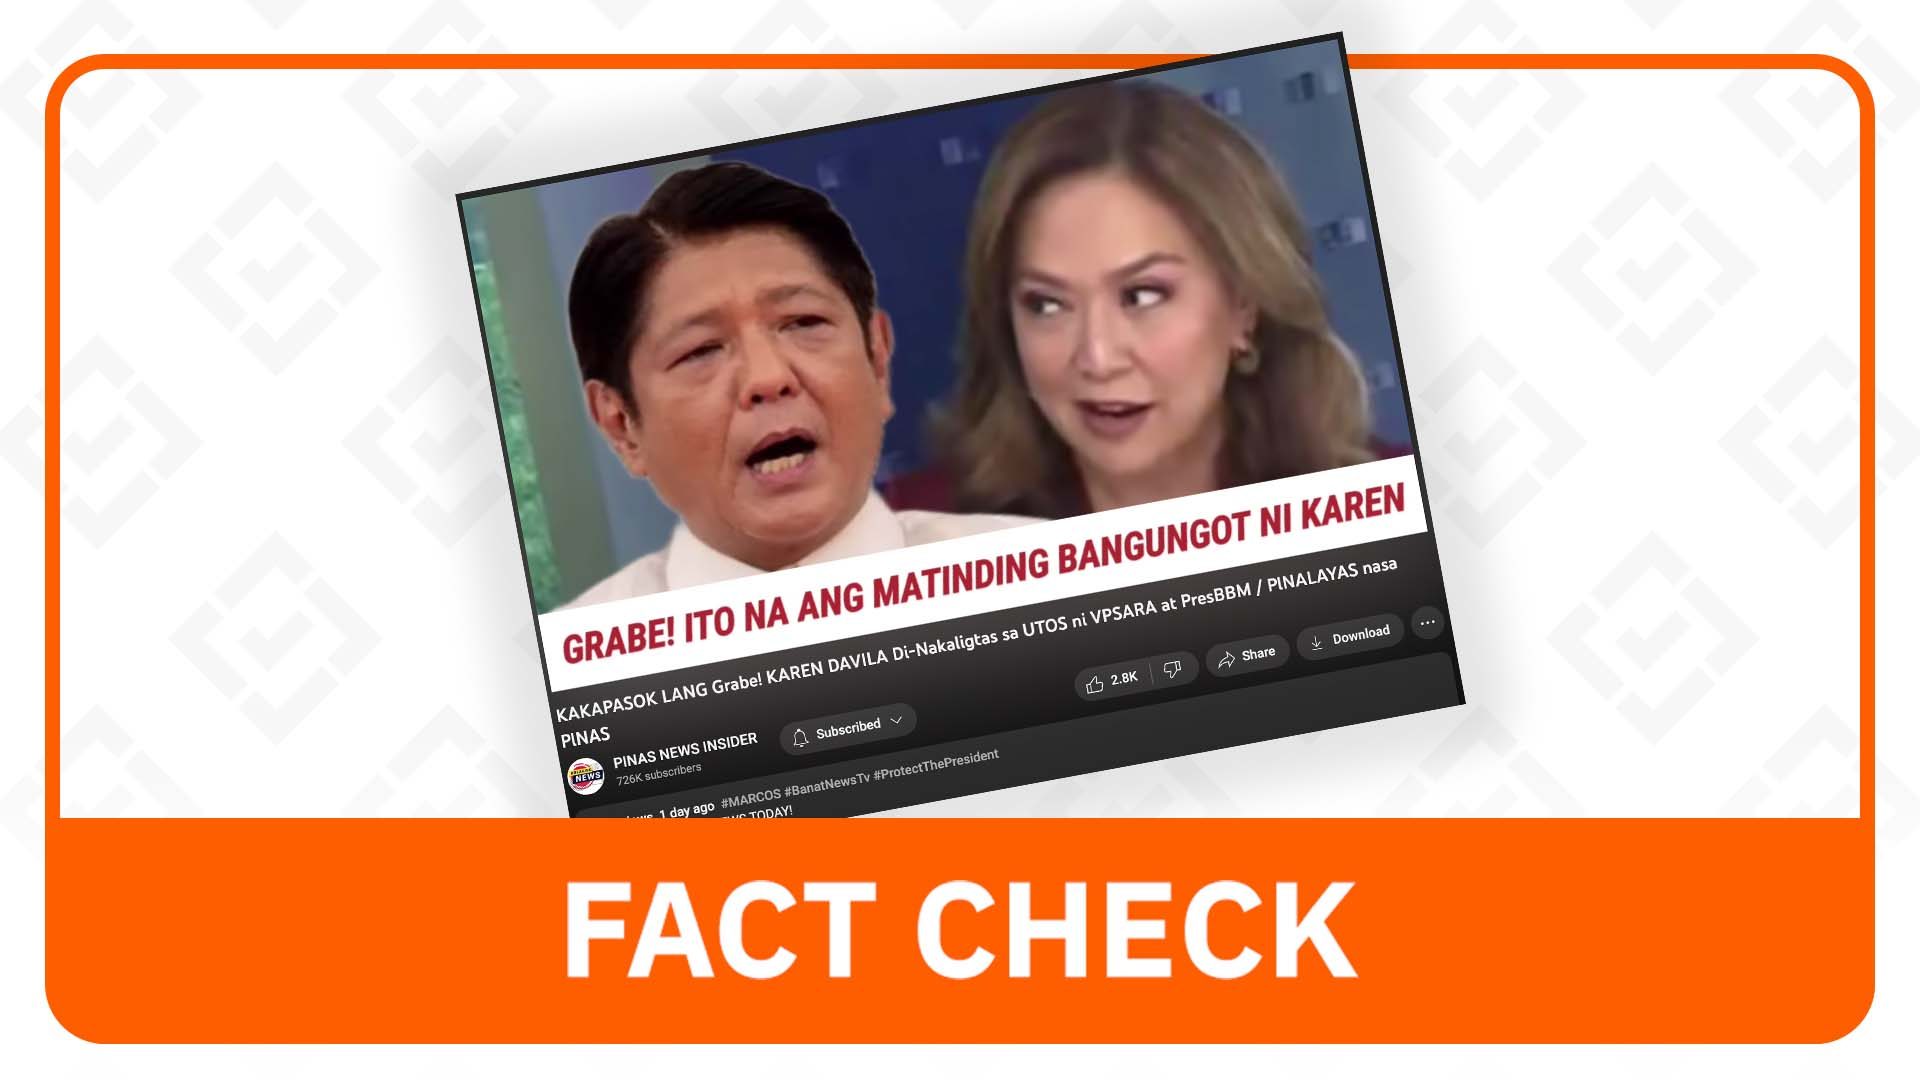 FACT CHECK:  Marcos did not issue an order for Karen Davila to leave the country